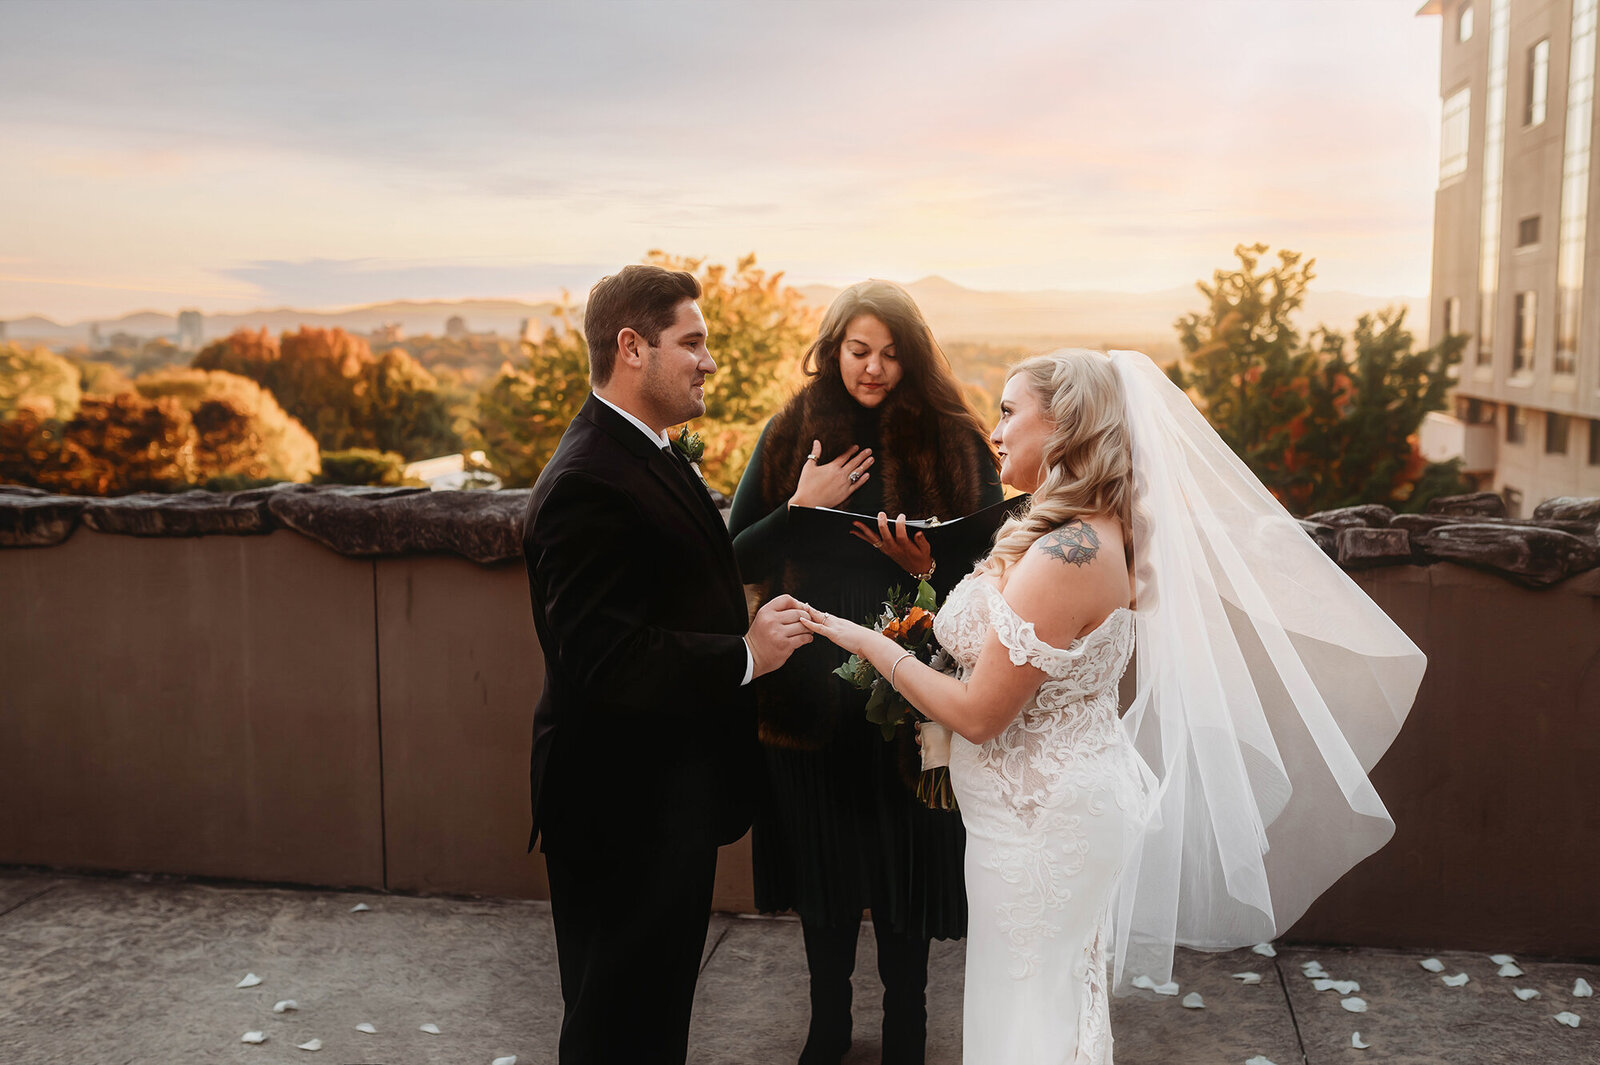 Elopement Ceremony at Grove Park Inn in Asheville, NC.